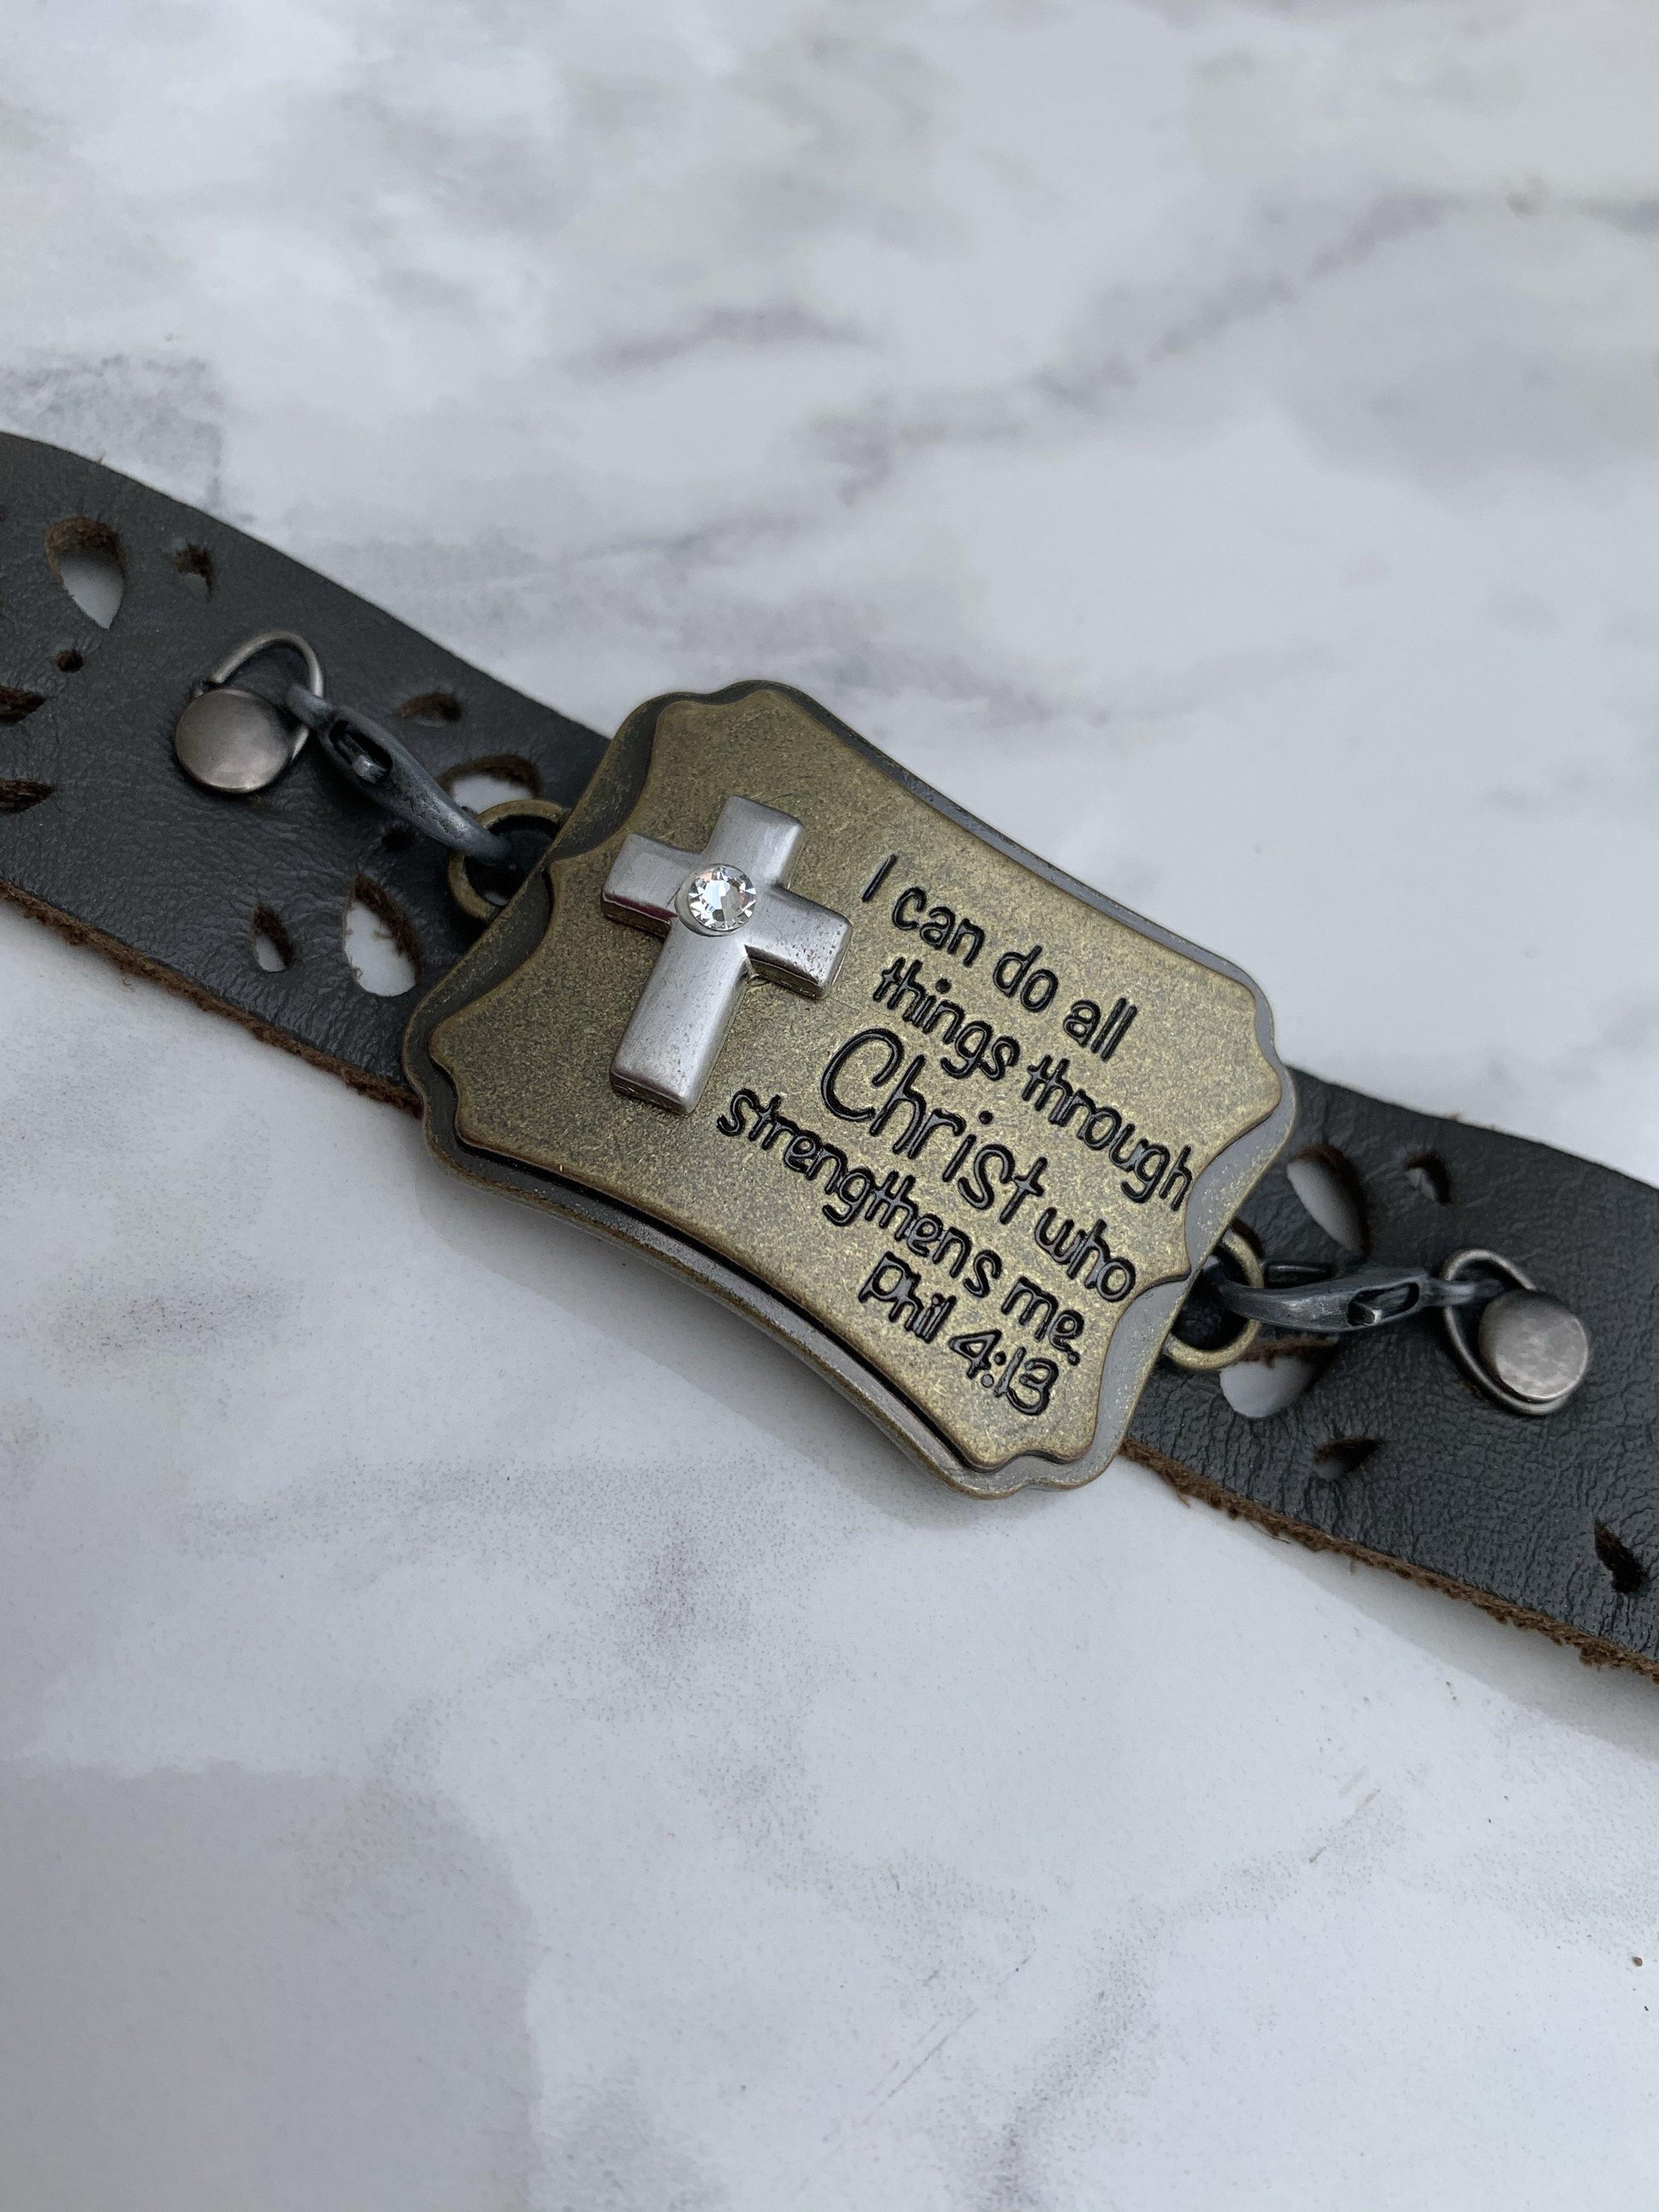 Bracelet | I can do all things through Christ who strengthens me Philippians 4:13 | Adjustable leather wrap - Stacy's Pink Martini Boutique